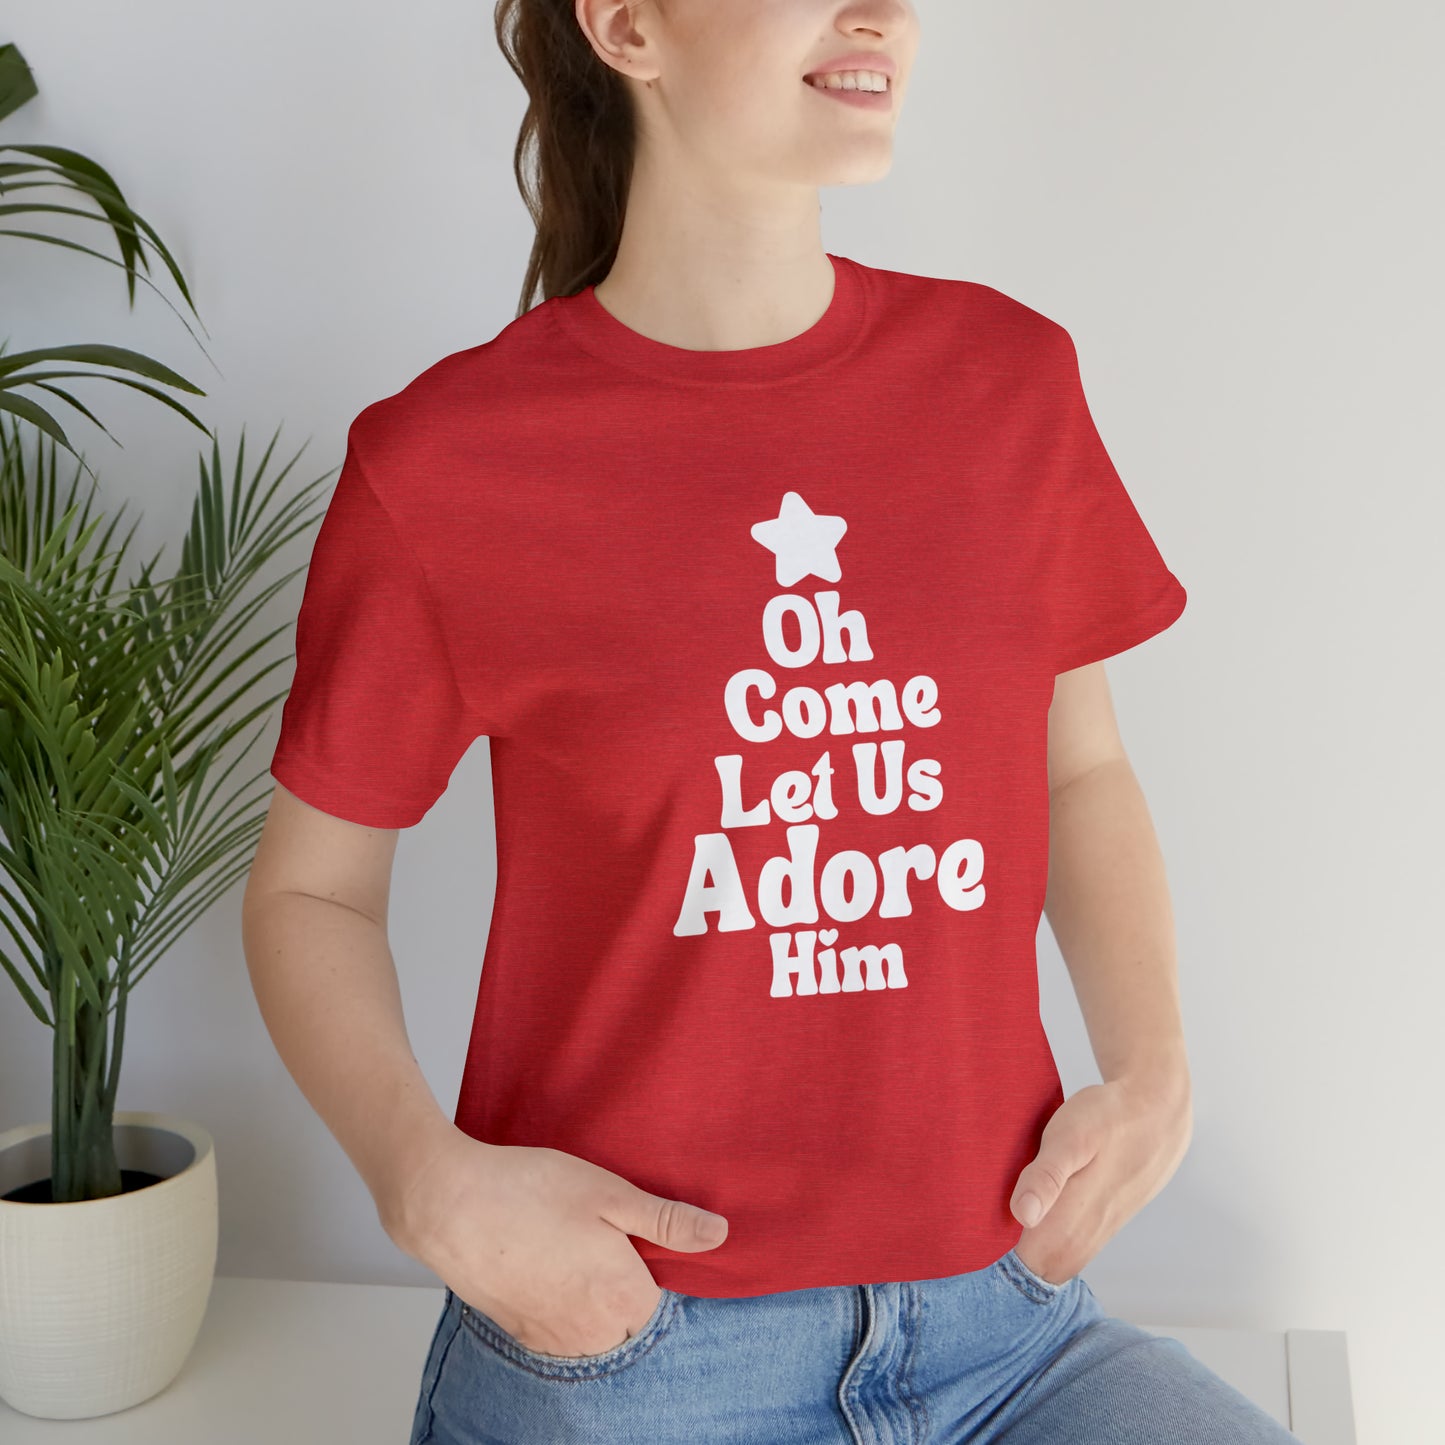 Oh Come Let Us Adore Him Tee